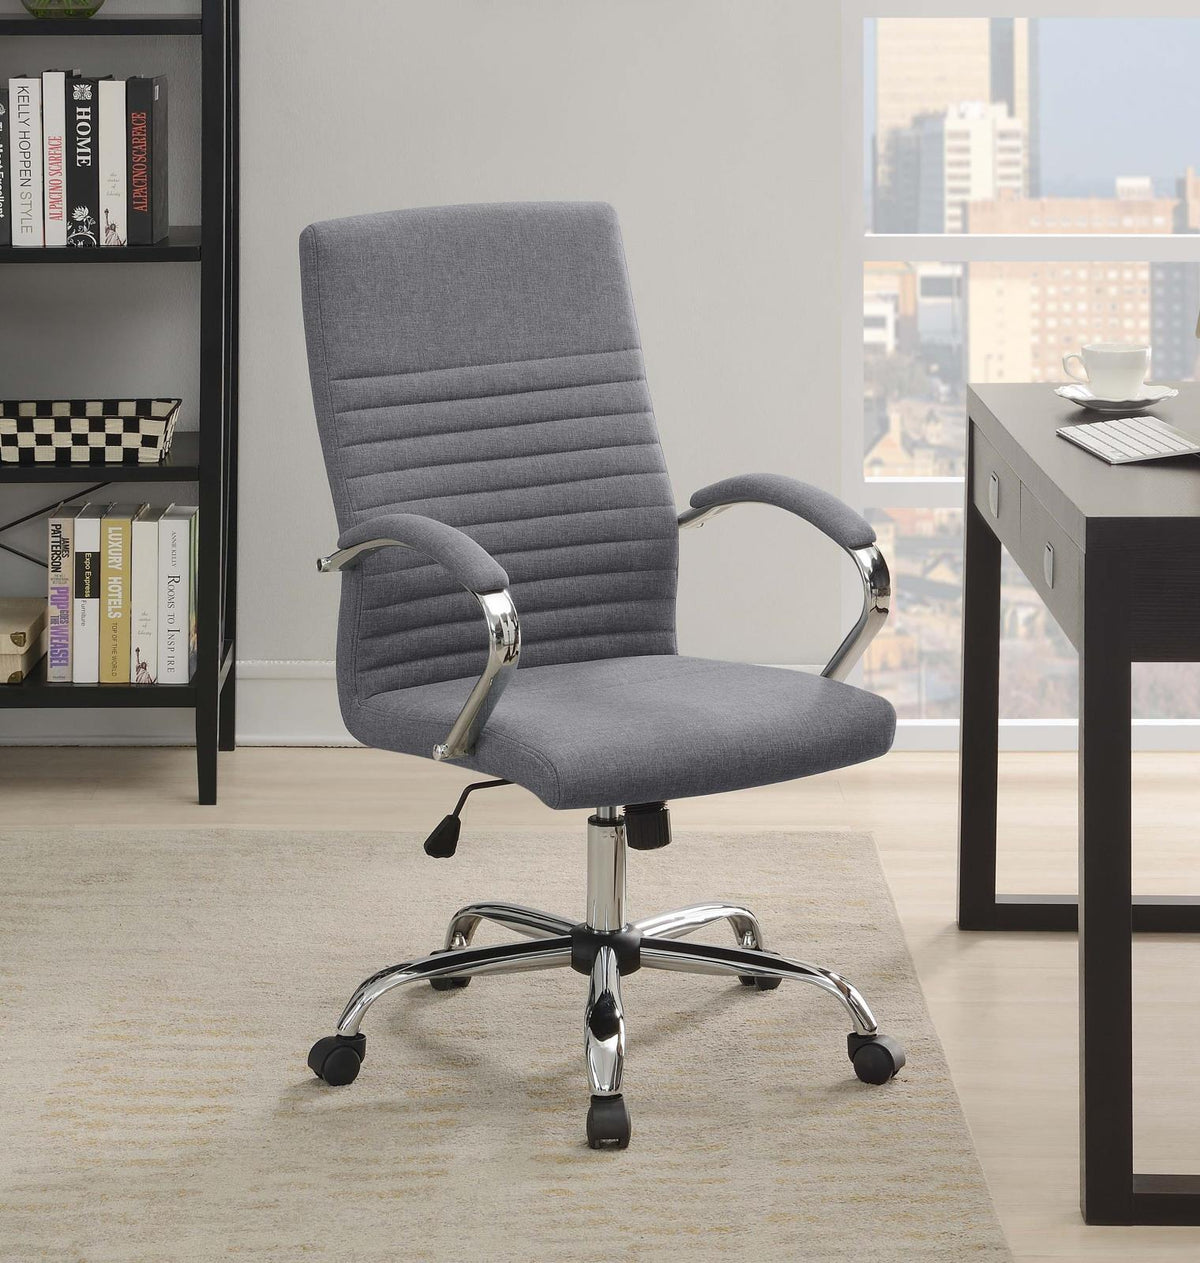 Abisko Upholstered Office Chair with Casters Grey and Chrome - Half Price Furniture